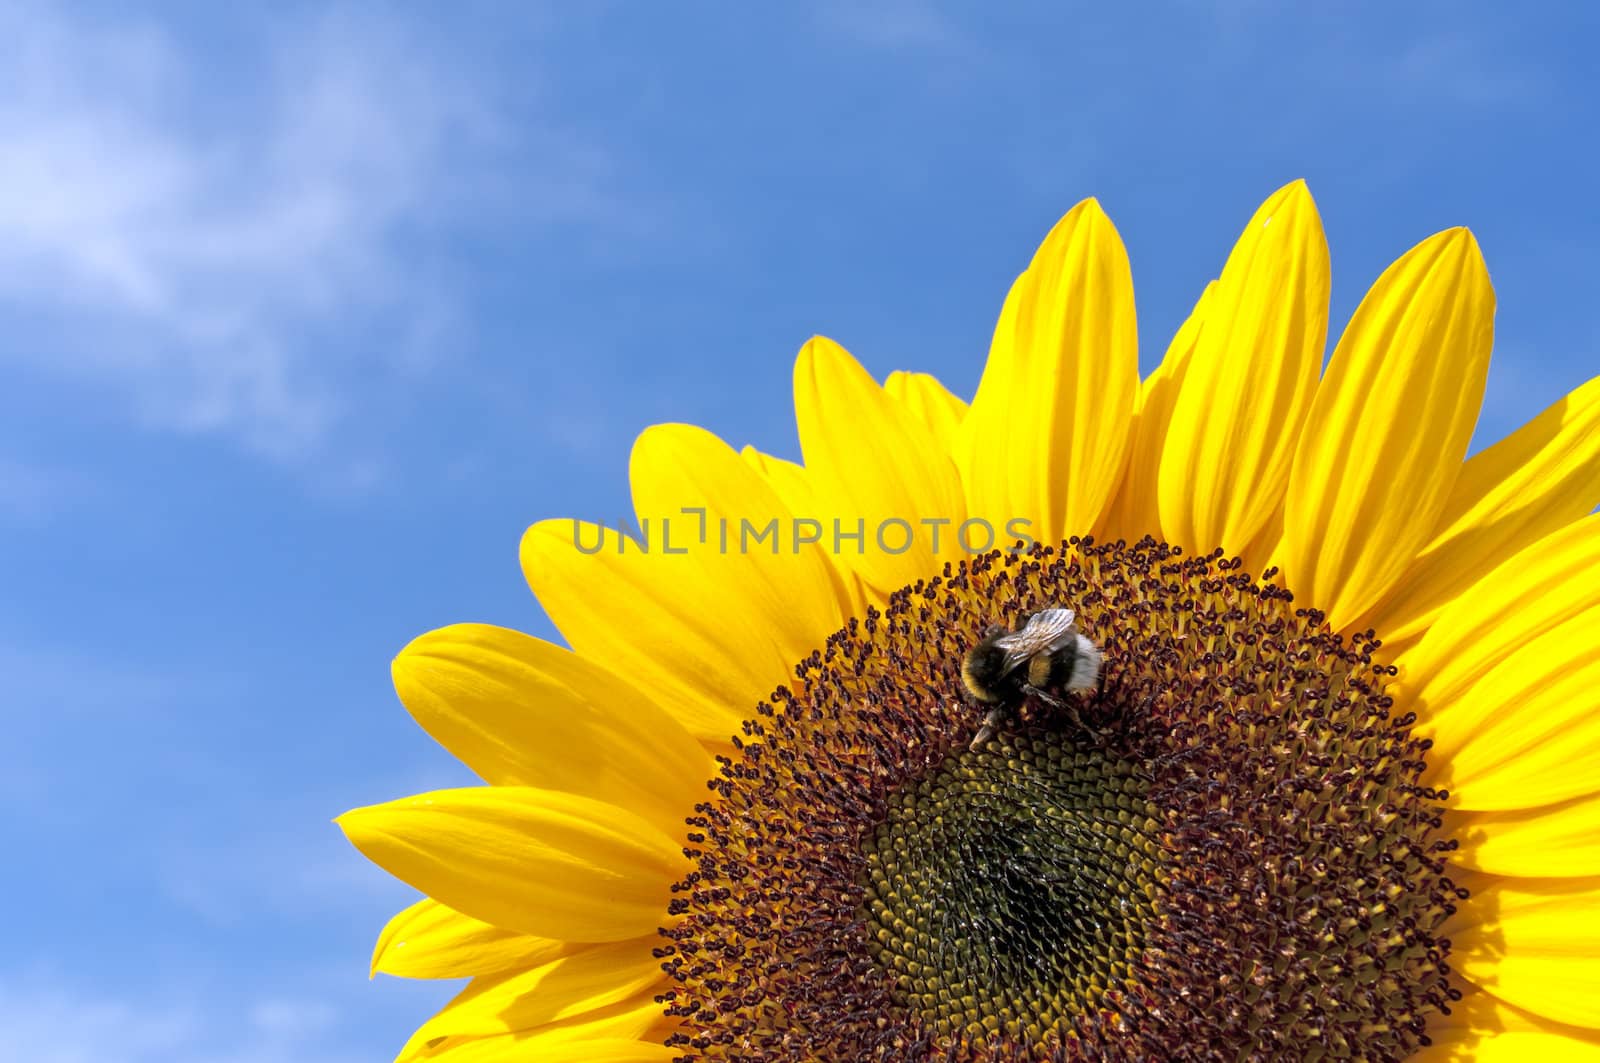 Beautiful Sunflower With Bee Against The Blue Sky By Sunny Wheather